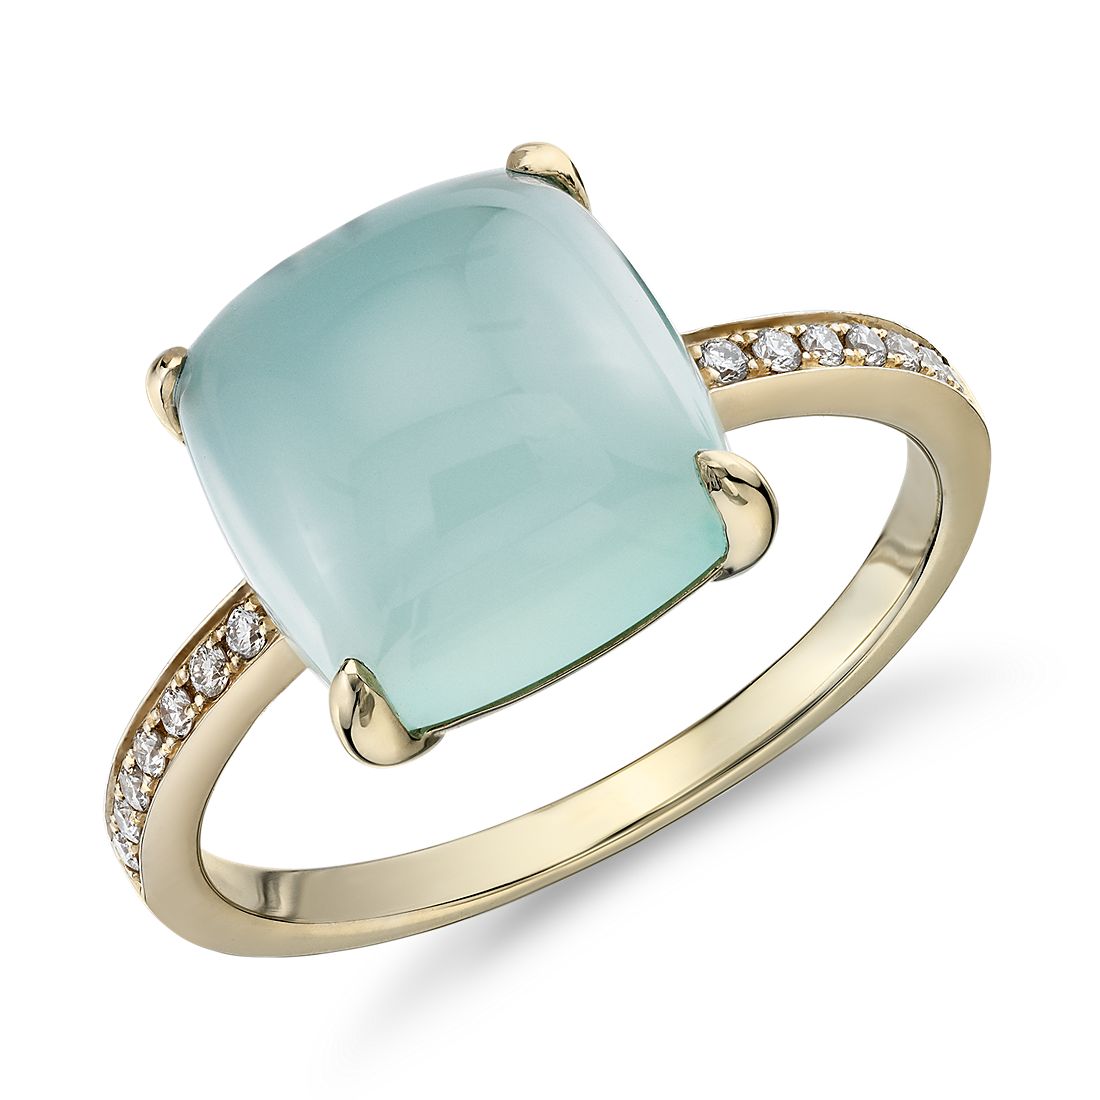 Cushion Cut Green Chalcedony Cabochon Ring with Diamond Sidestones in 14k Yellow Gold (10mm)